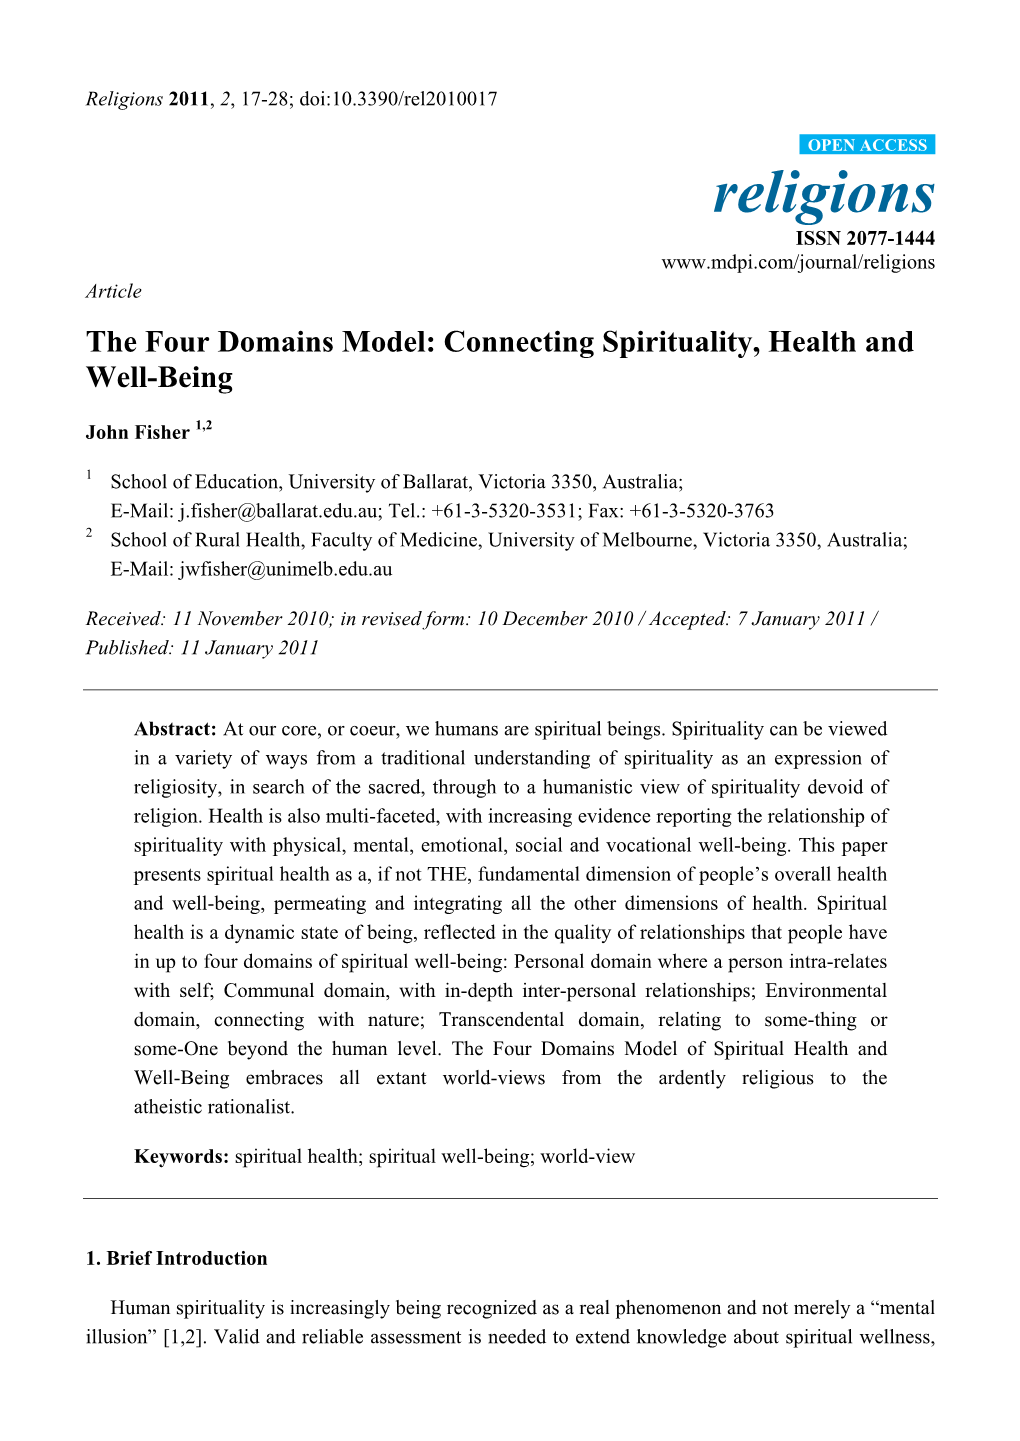 The Four Domains Model: Connecting Spirituality, Health and Well-Being